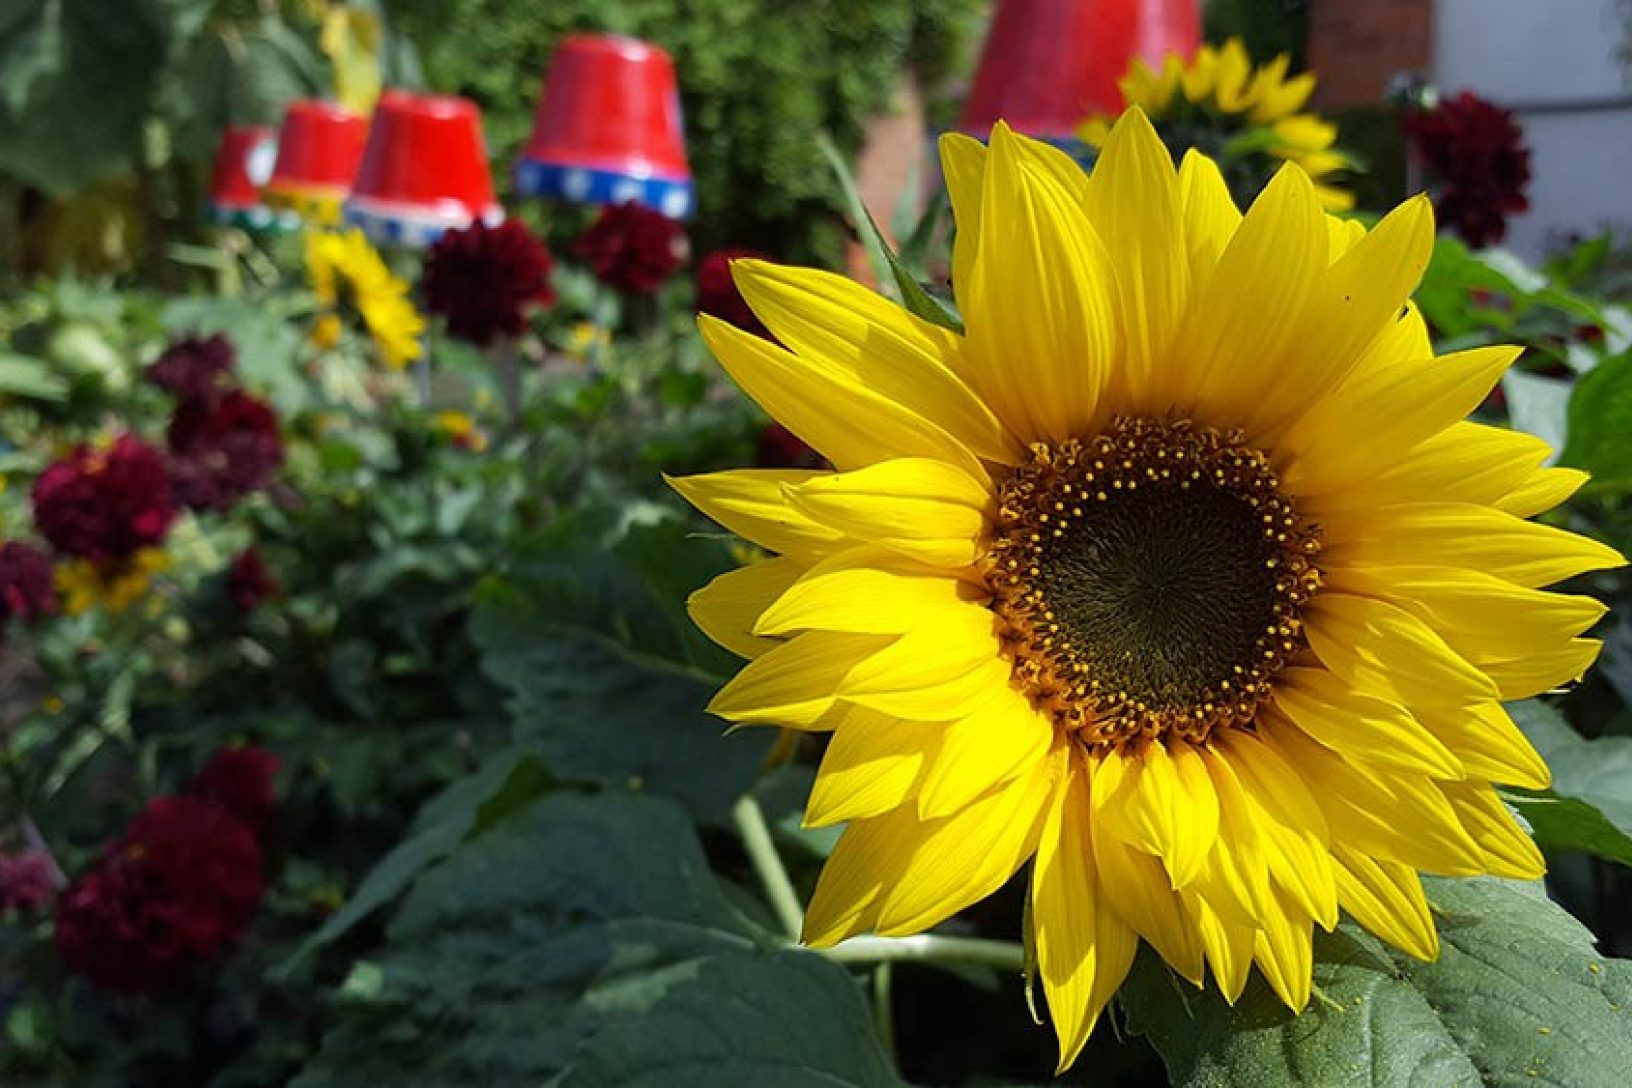 A bright yellow sunflower in bloom